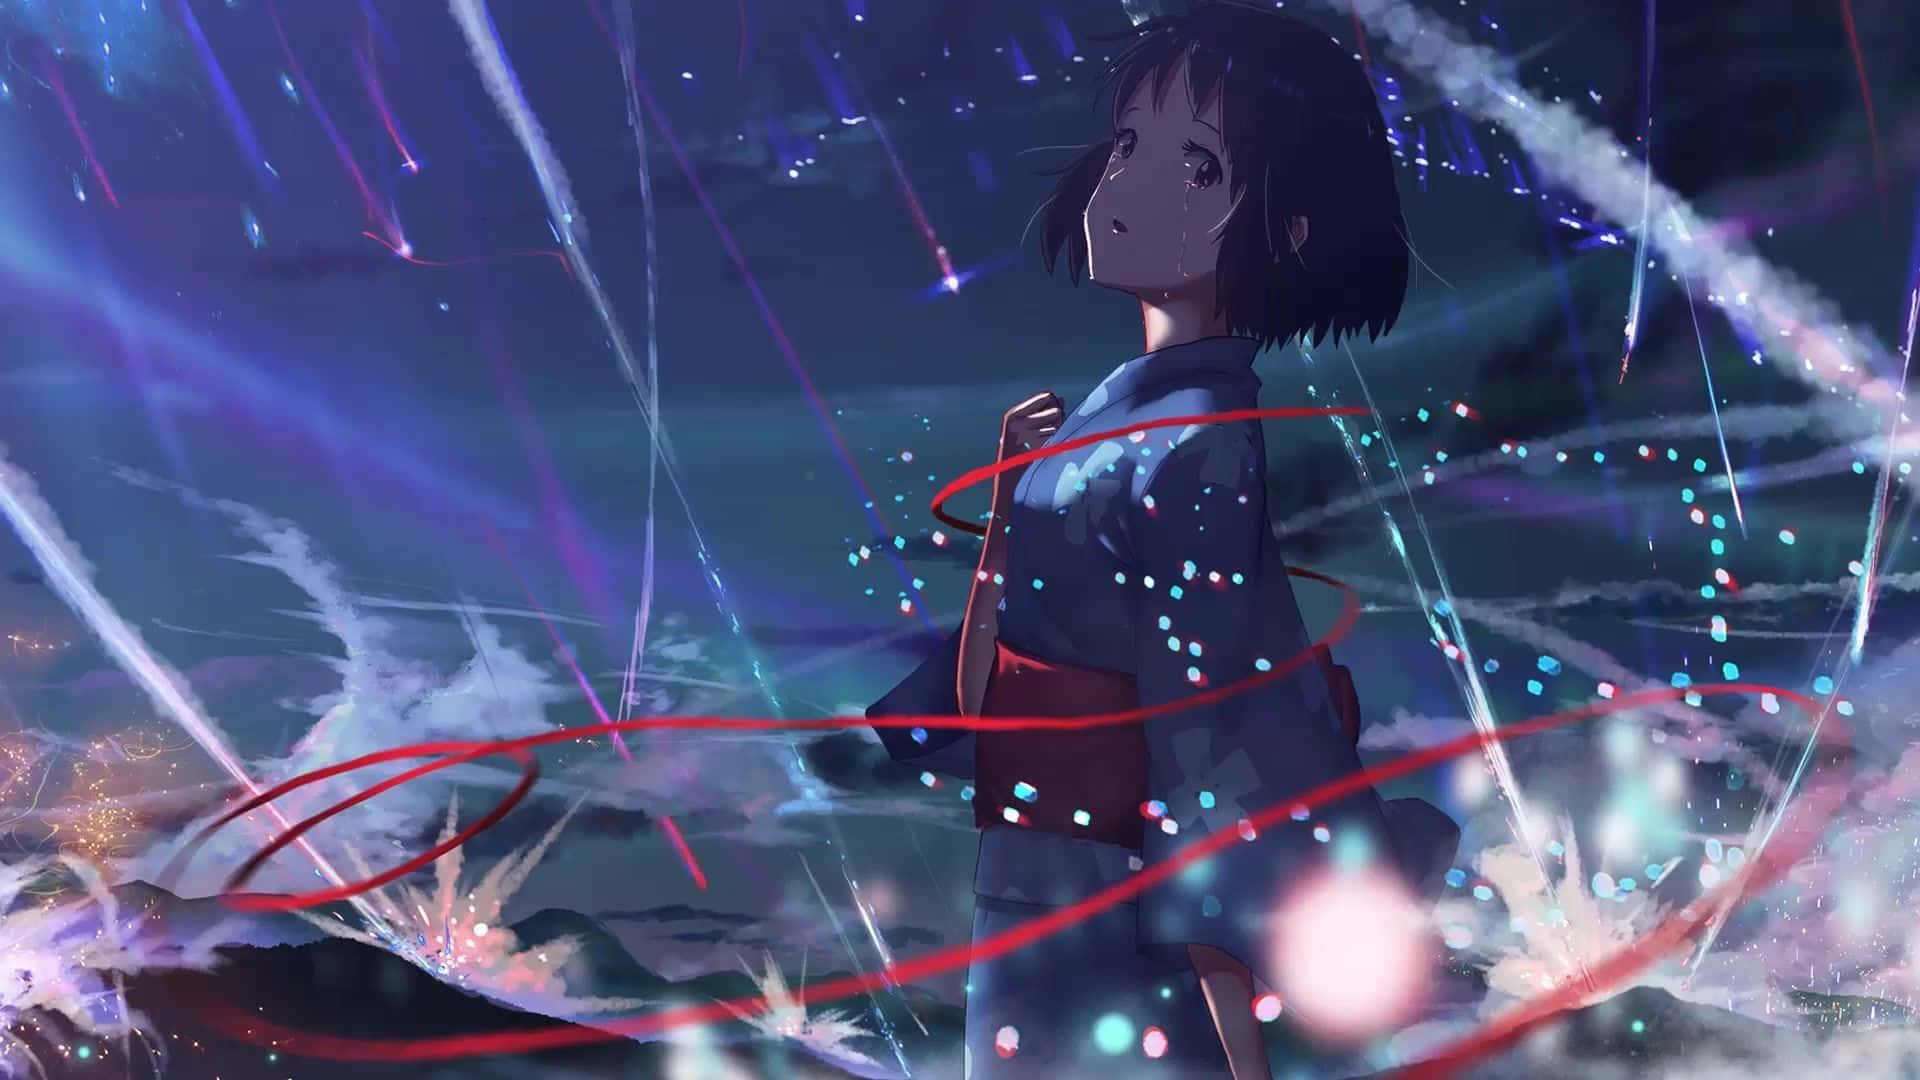 An emotional twilight moment from the hit movie, Your Name